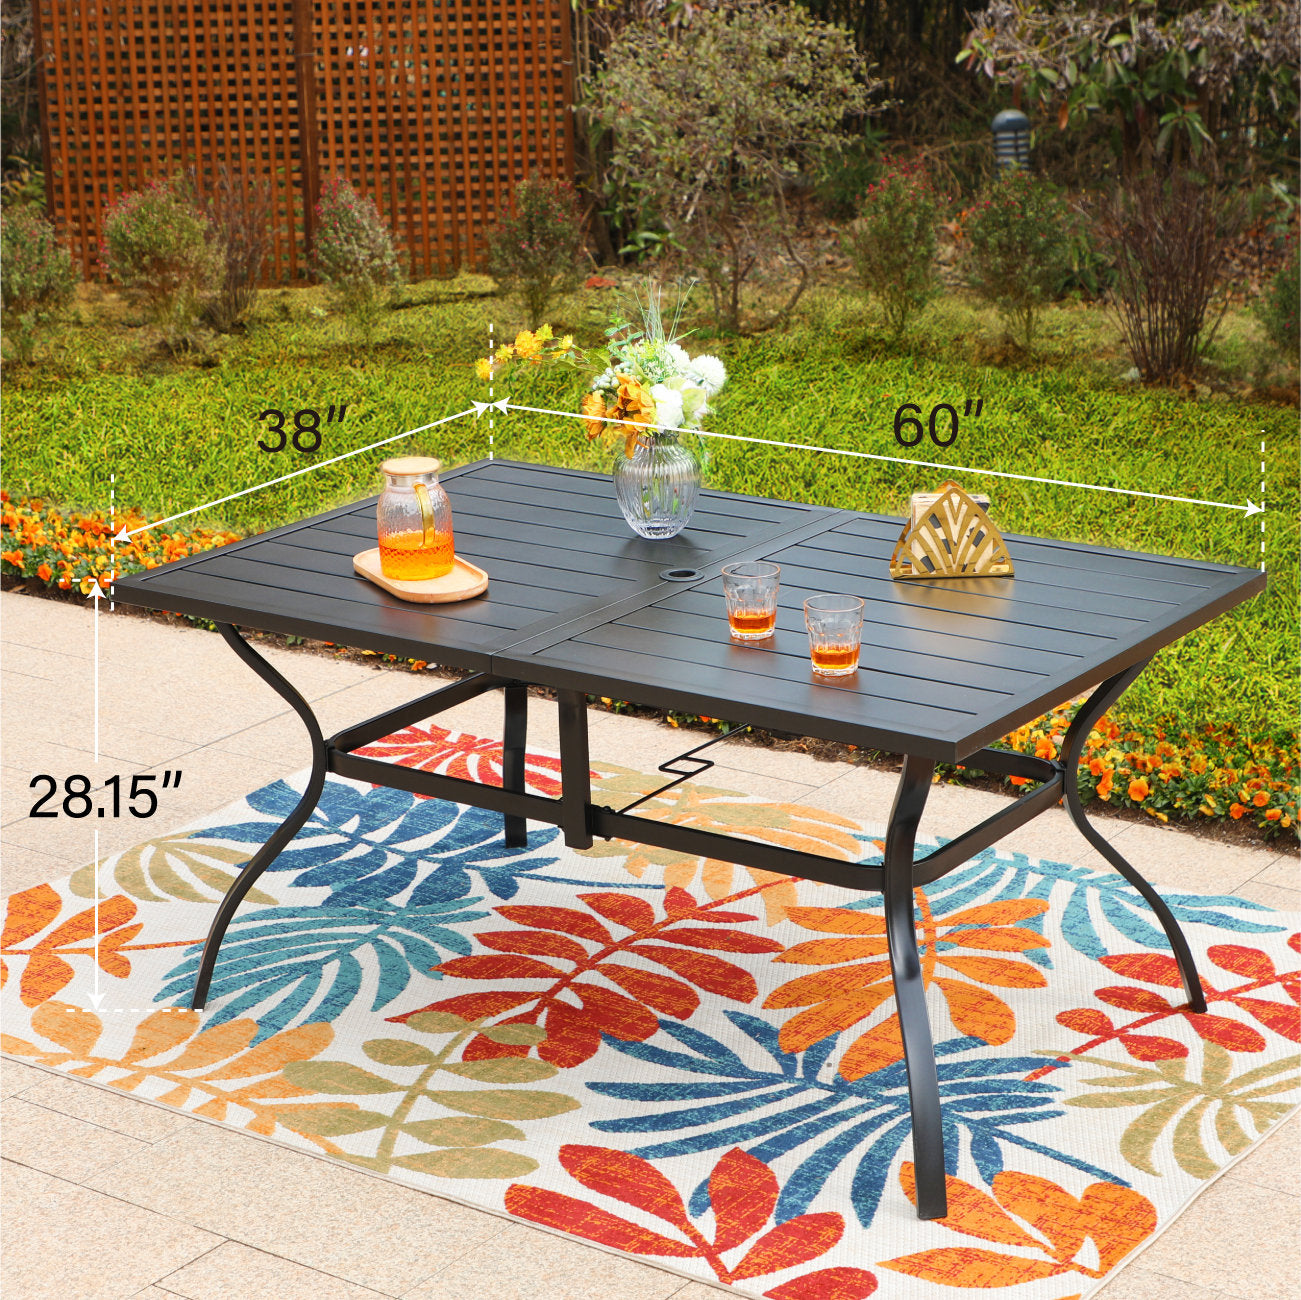 Phi Villa 6-Seat Outdoor Metal Dining Table with Umbrella Hole